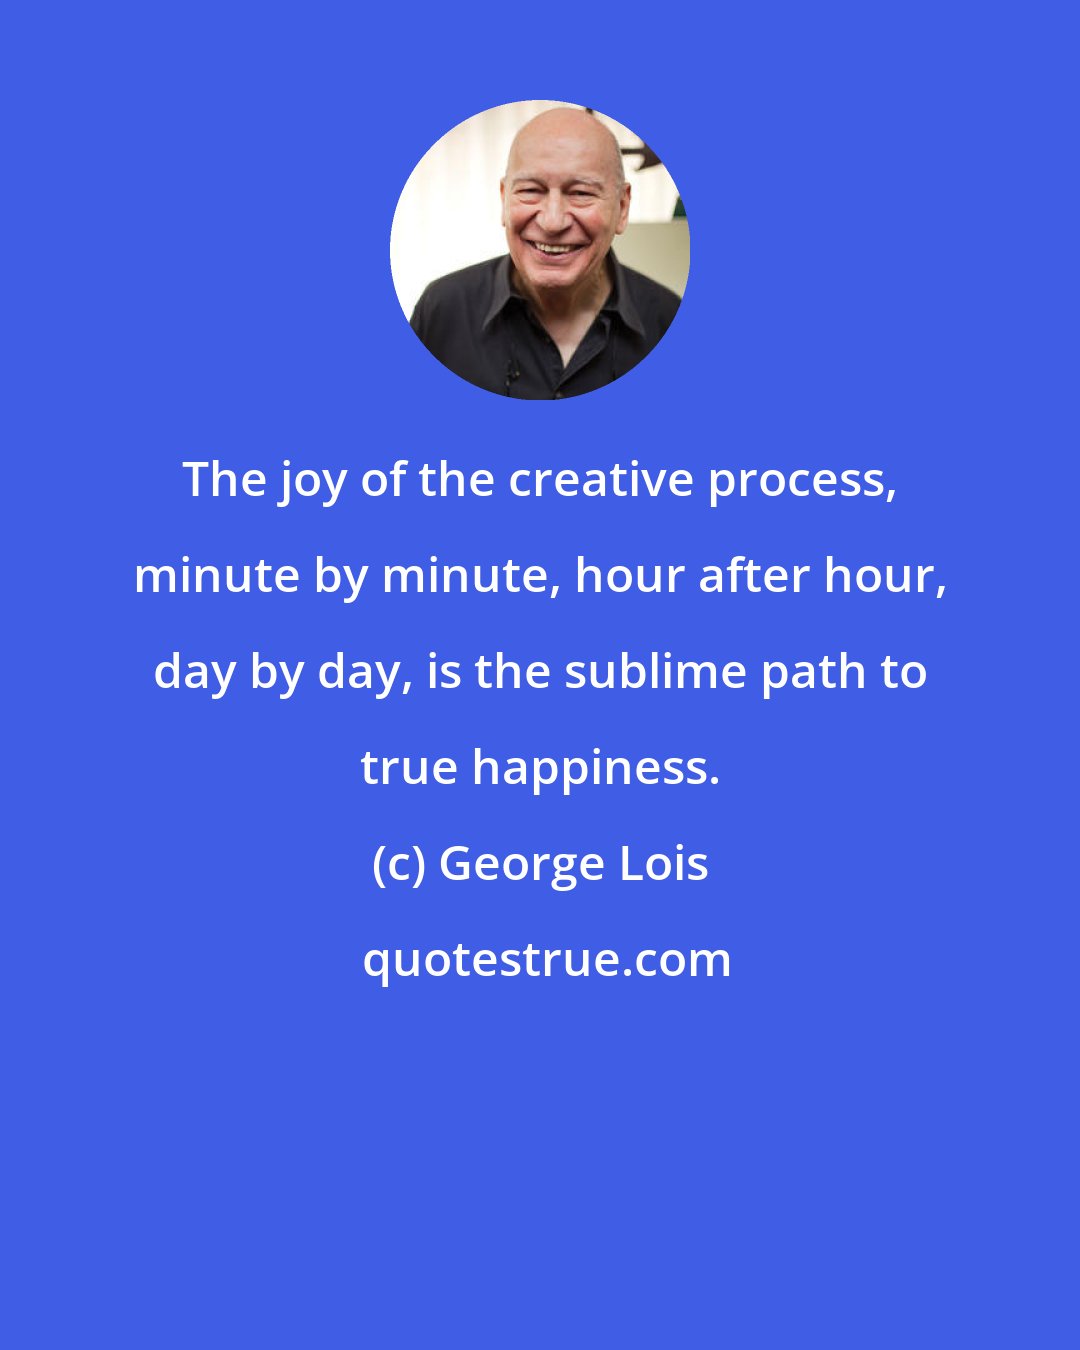 George Lois: The joy of the creative process, minute by minute, hour after hour, day by day, is the sublime path to true happiness.